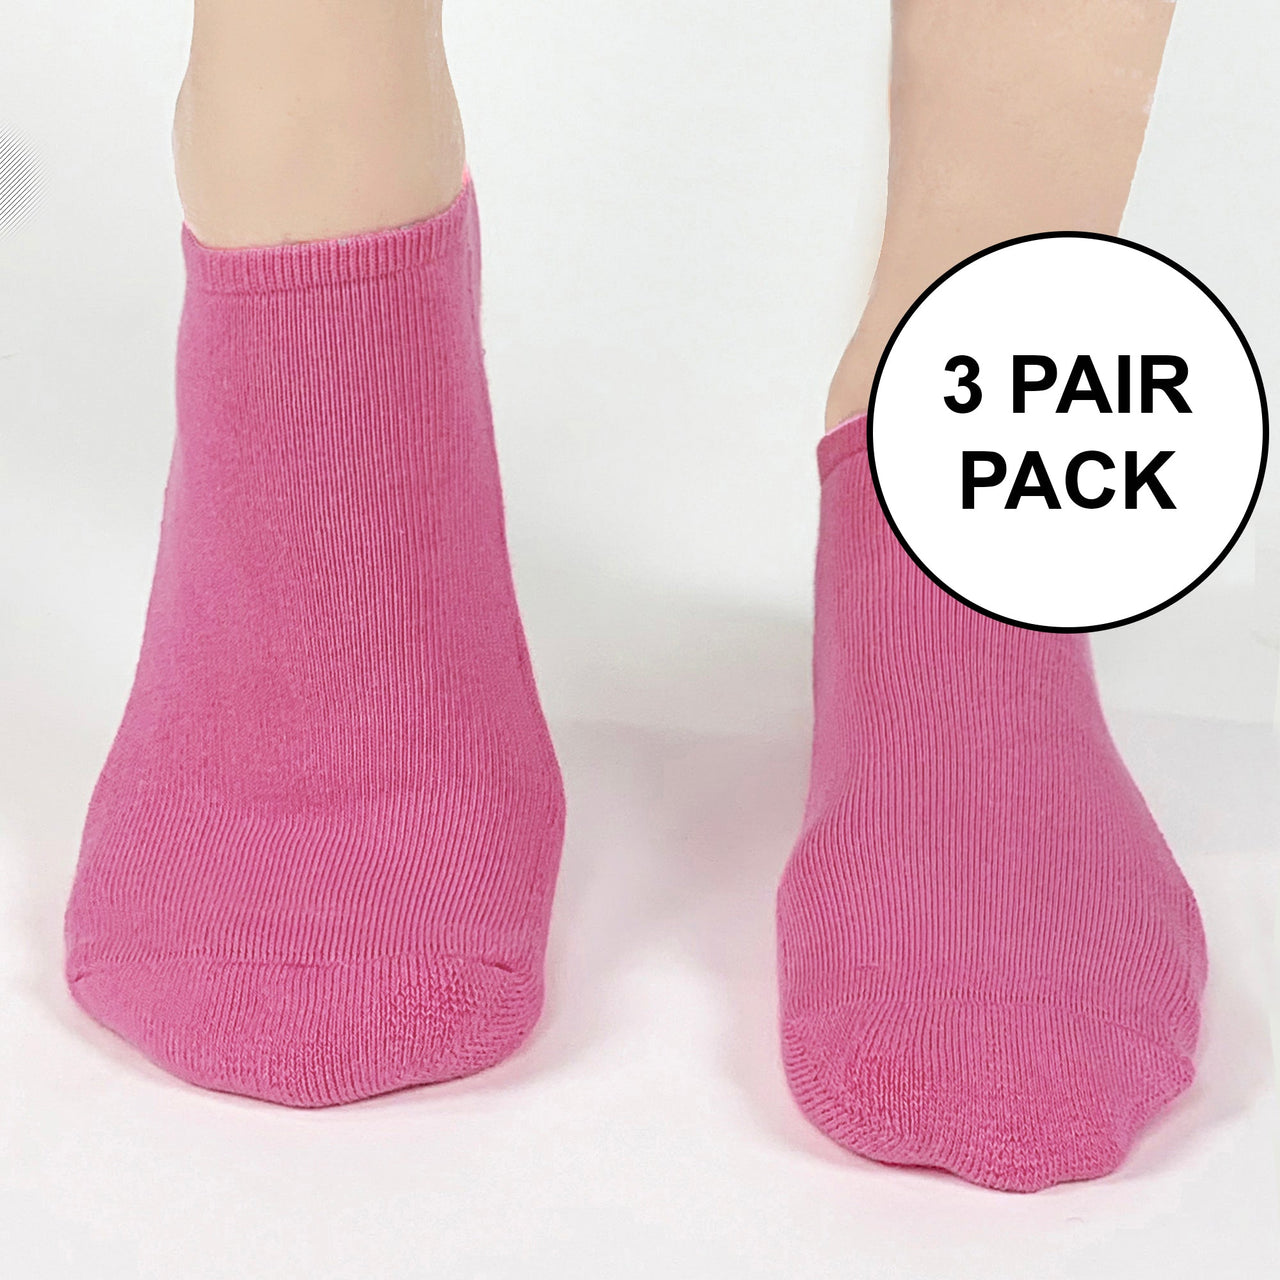 Super soft fuchsia cotton blend no show socks available in three sizes sold as a three pair pack in same size and color.